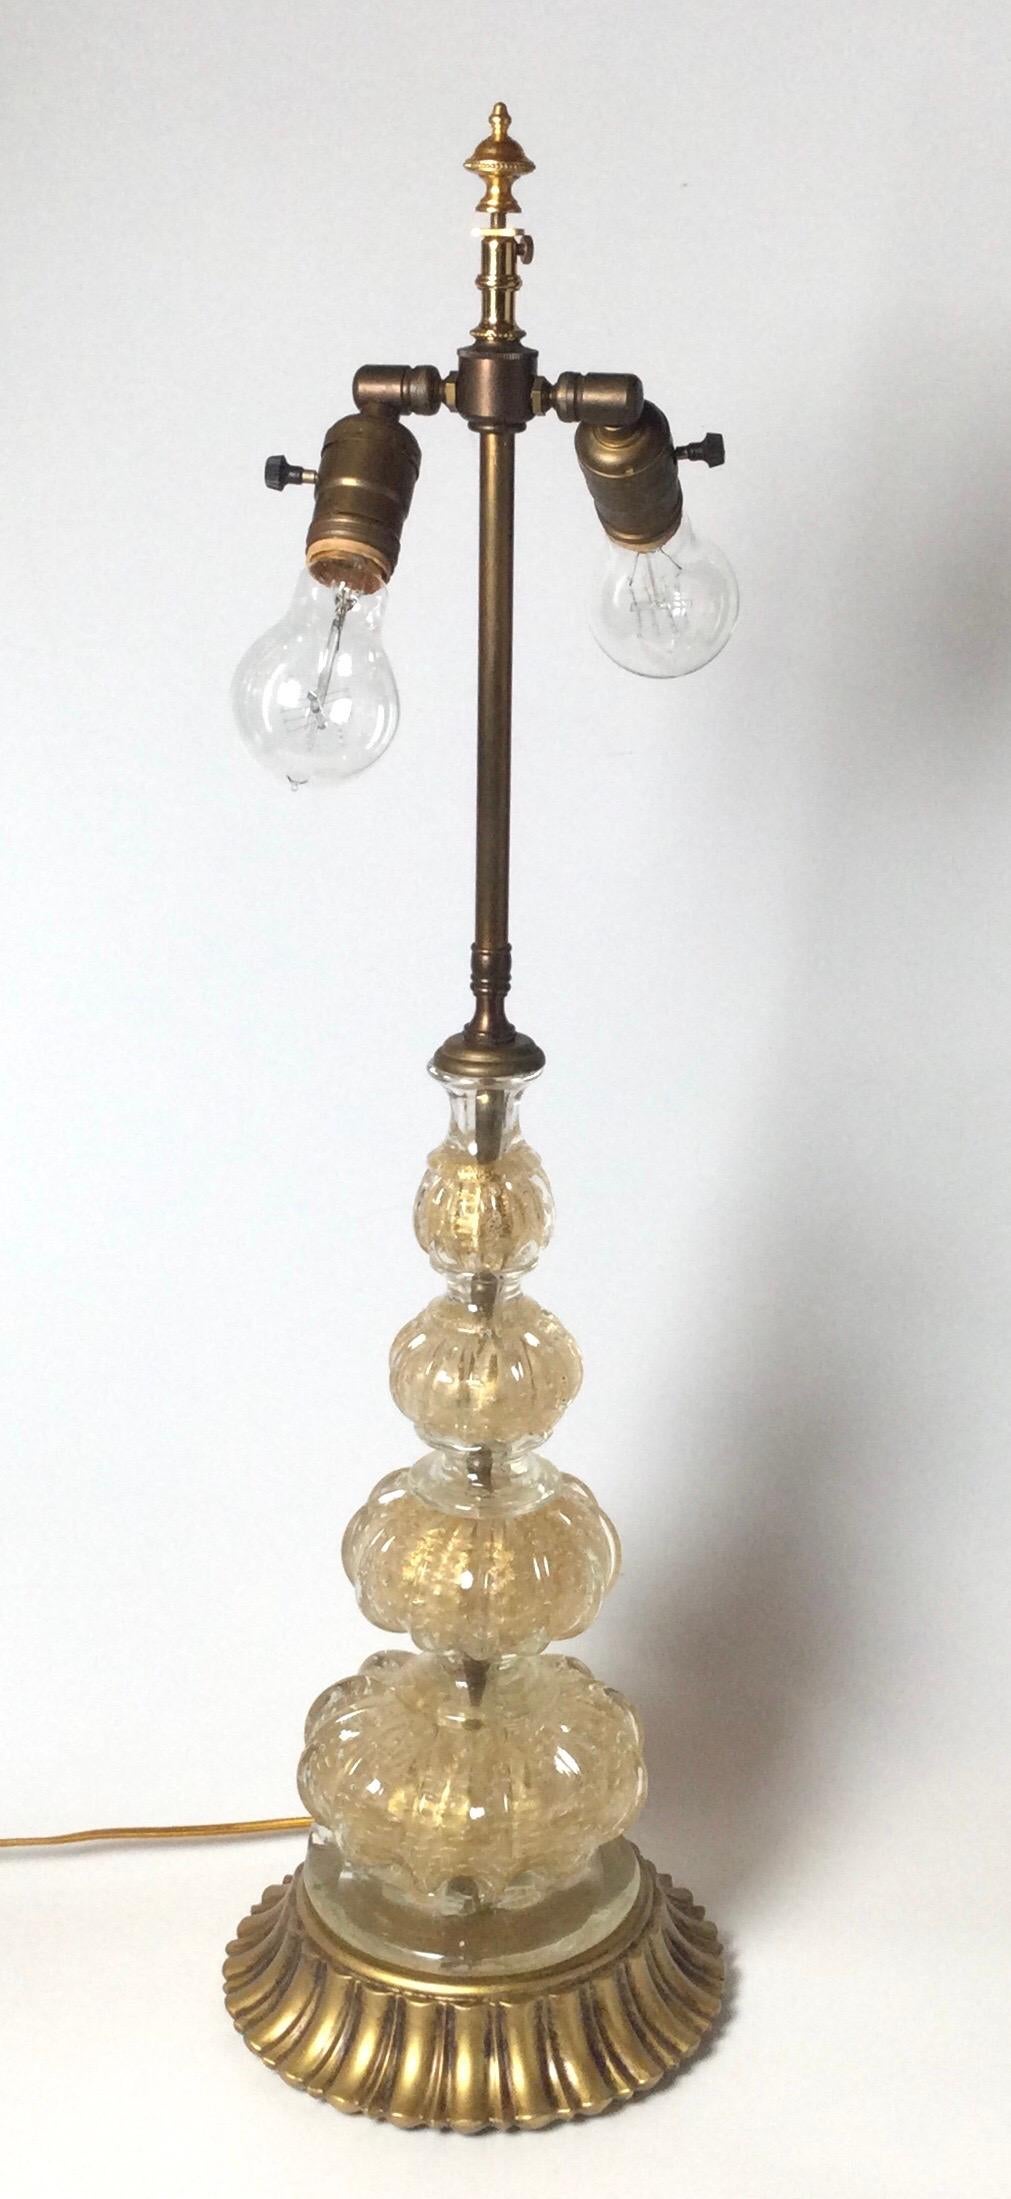 Very Chic Italian Venetian glass lamp with giltwood base. The center column with variegated sizes of orbs in a gold fleck infused hand blown Venetian glass. The base is a scalloped gilt wood, with two sockets for extra light. The shade is for